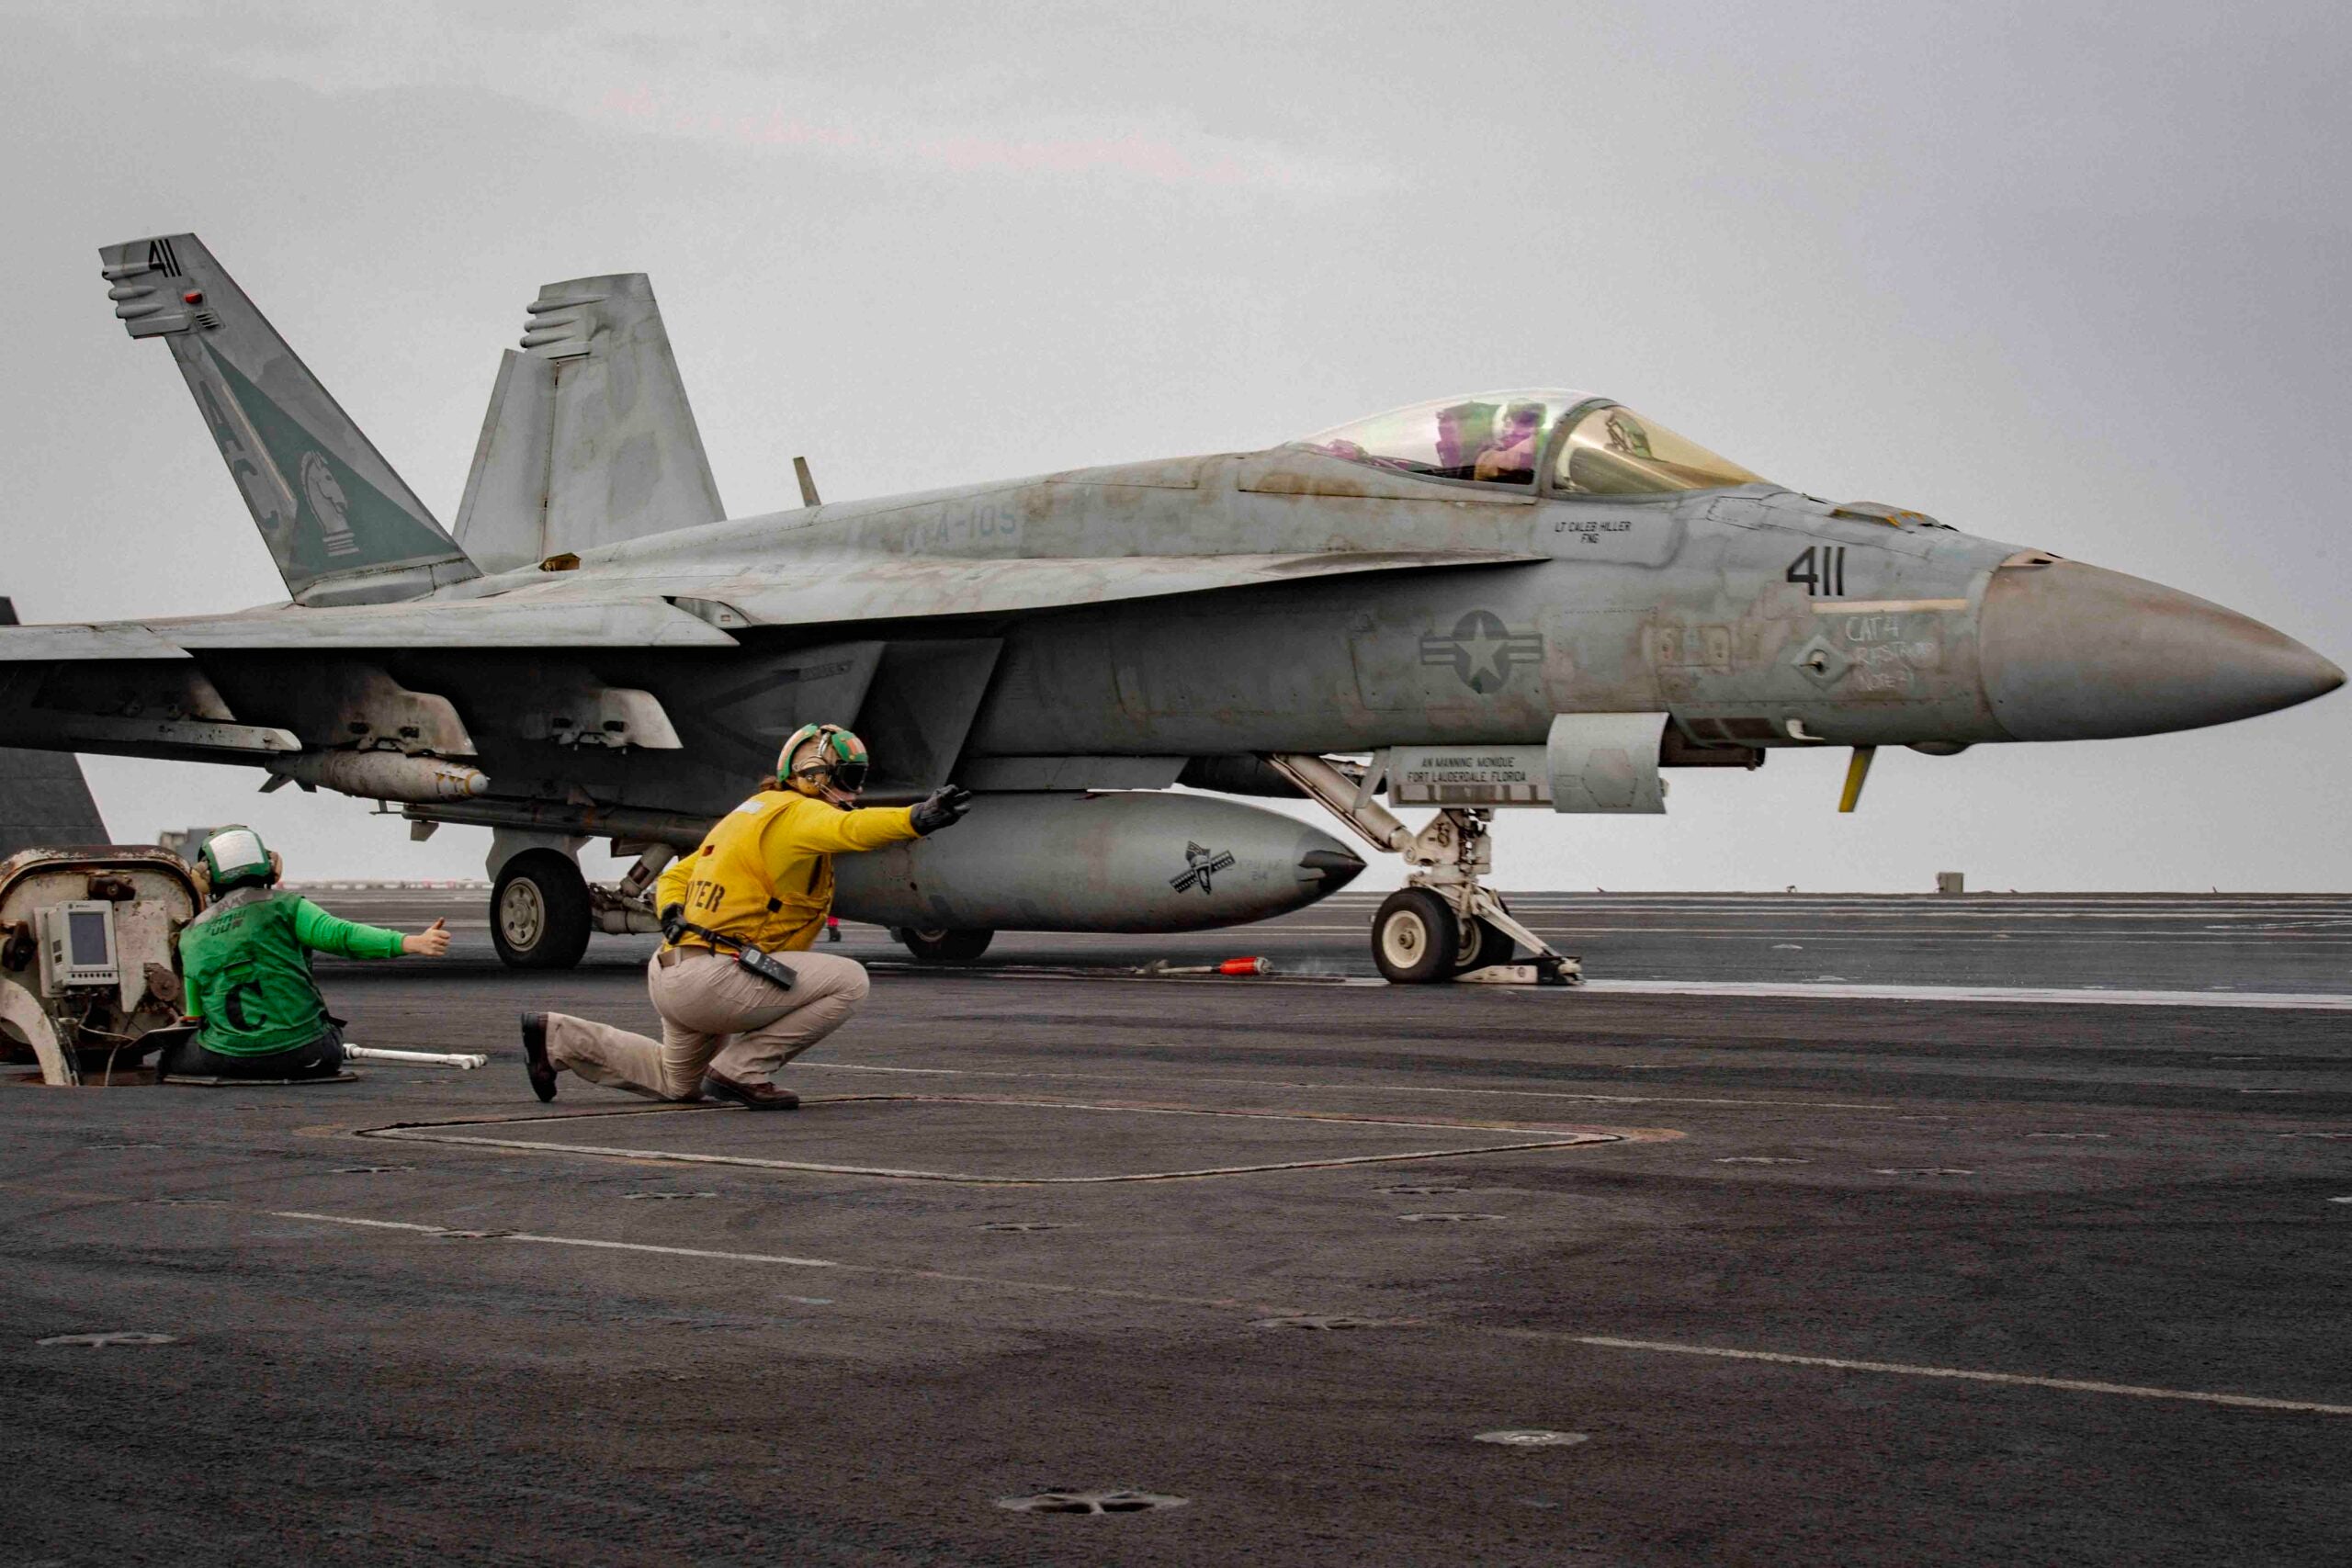 240305-N-DH109-1020 RED SEA (March 5, 2024) Sailors signal the launch of an F/A-18E Super Hornet, attached to the "Gunslingers" of Strike Fighter Squadron (VFA) 105, during flight operations aboard the Nimitz-class aircraft carrier USS Dwight D. Eisenhower (CVN 69) in the Red Sea, March 5. The Dwight D. Eisenhower Carrier Strike Group is deployed to the U.S. 5th Fleet area of operations to support maritime security and stability in the Middle East region. (Official U.S. Navy photo)